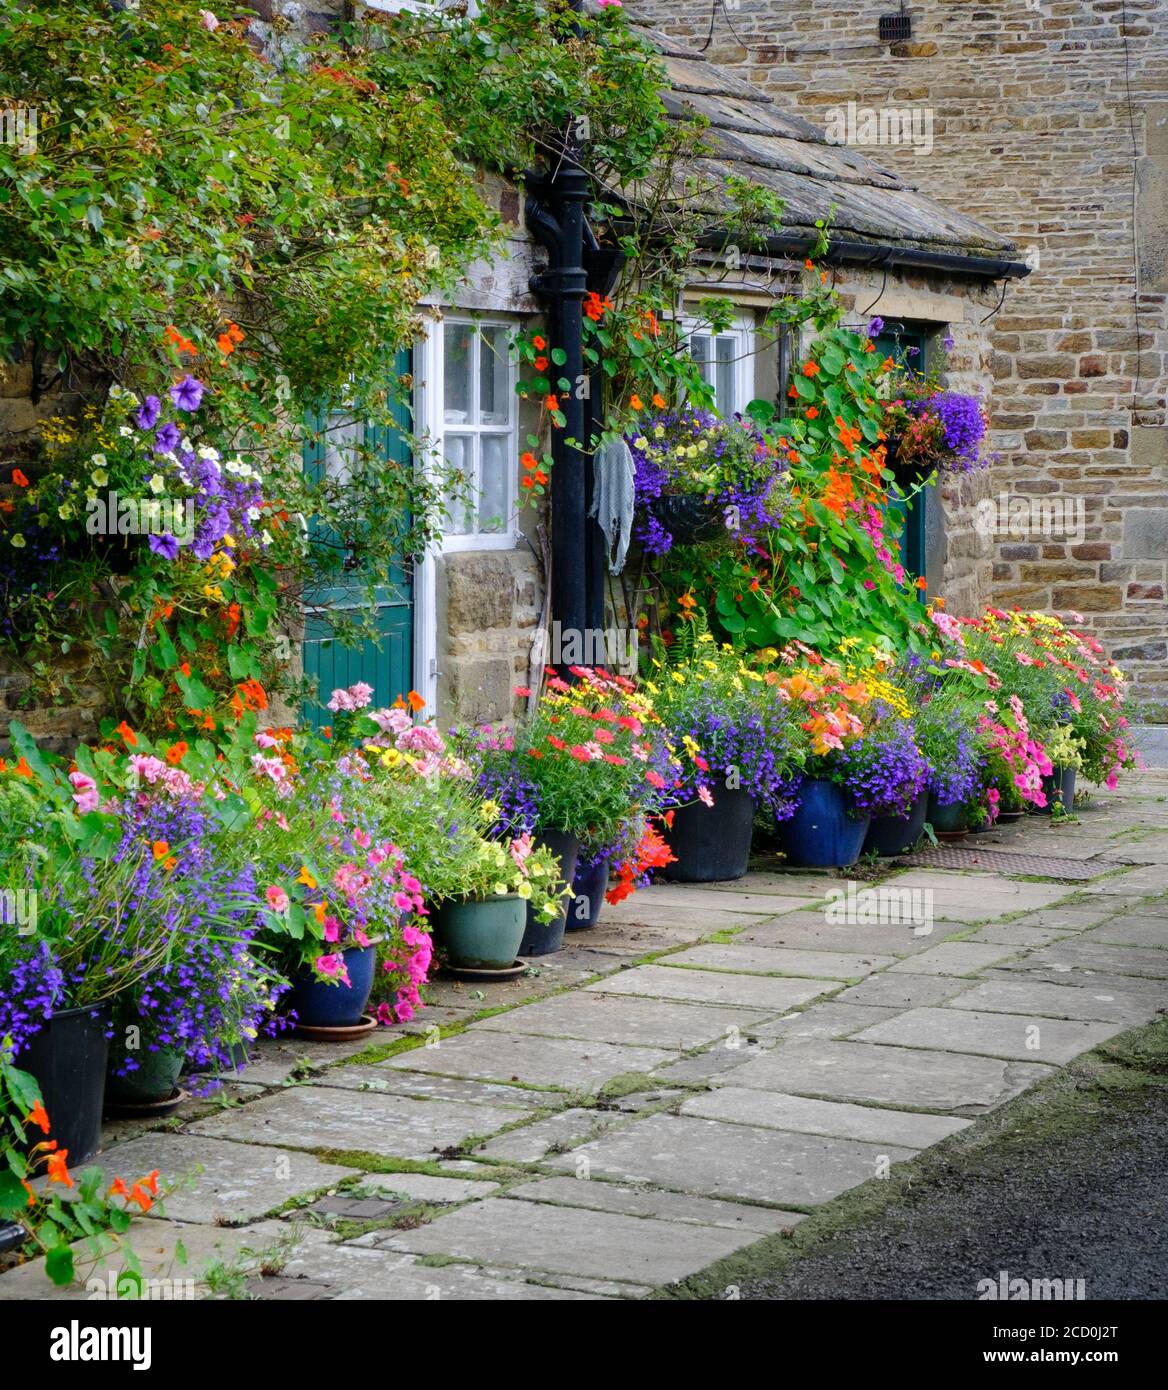 Profusion of flowers in pots and hanging baskets outside a country cottage in the Northumberland village of Blanchland. Stock Photo